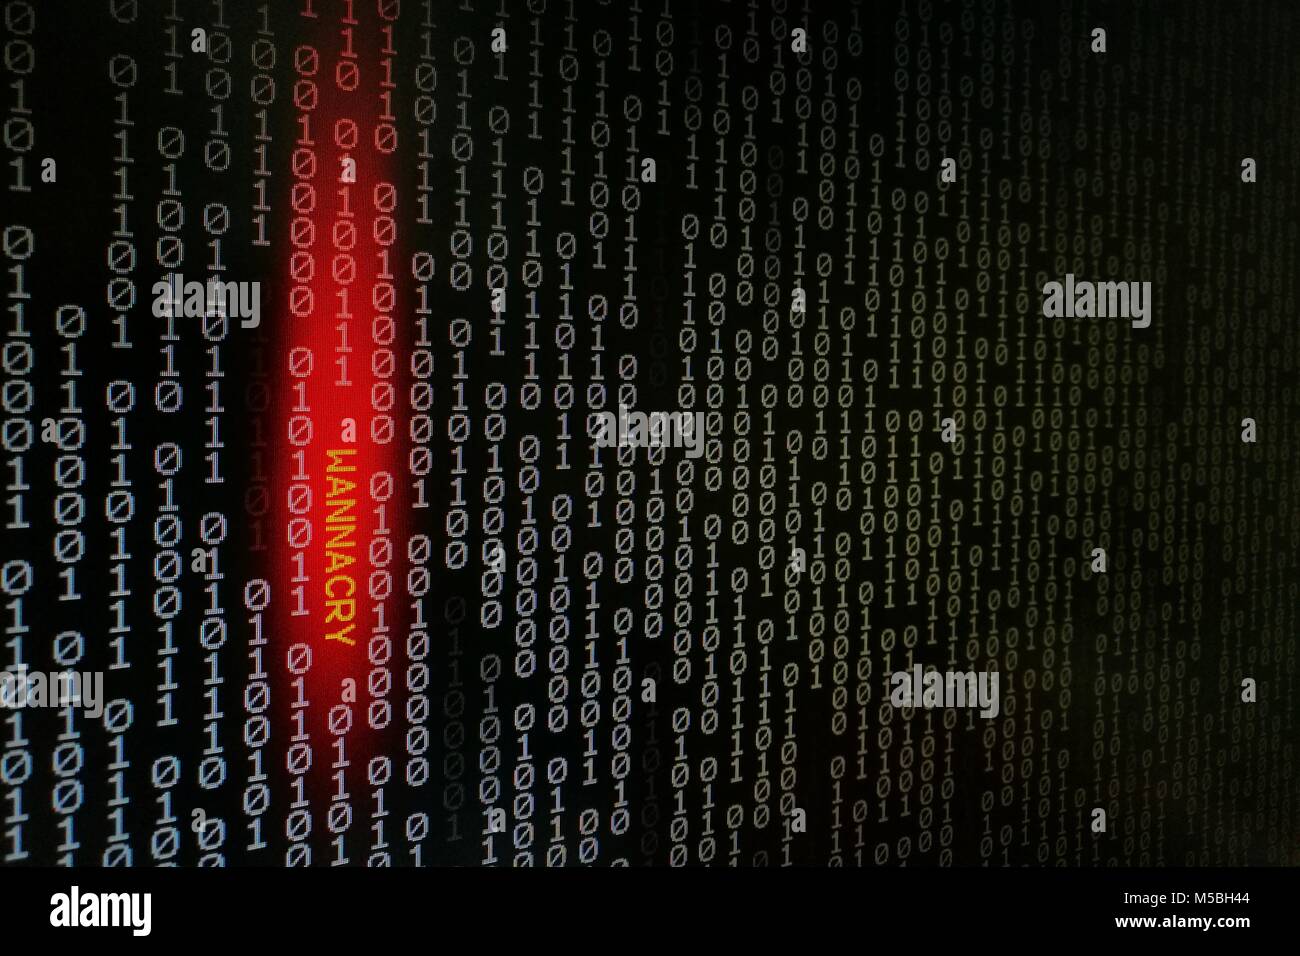 computer virus. binary data shown on black screen with wannacry text hilight with red colour. Stock Photo